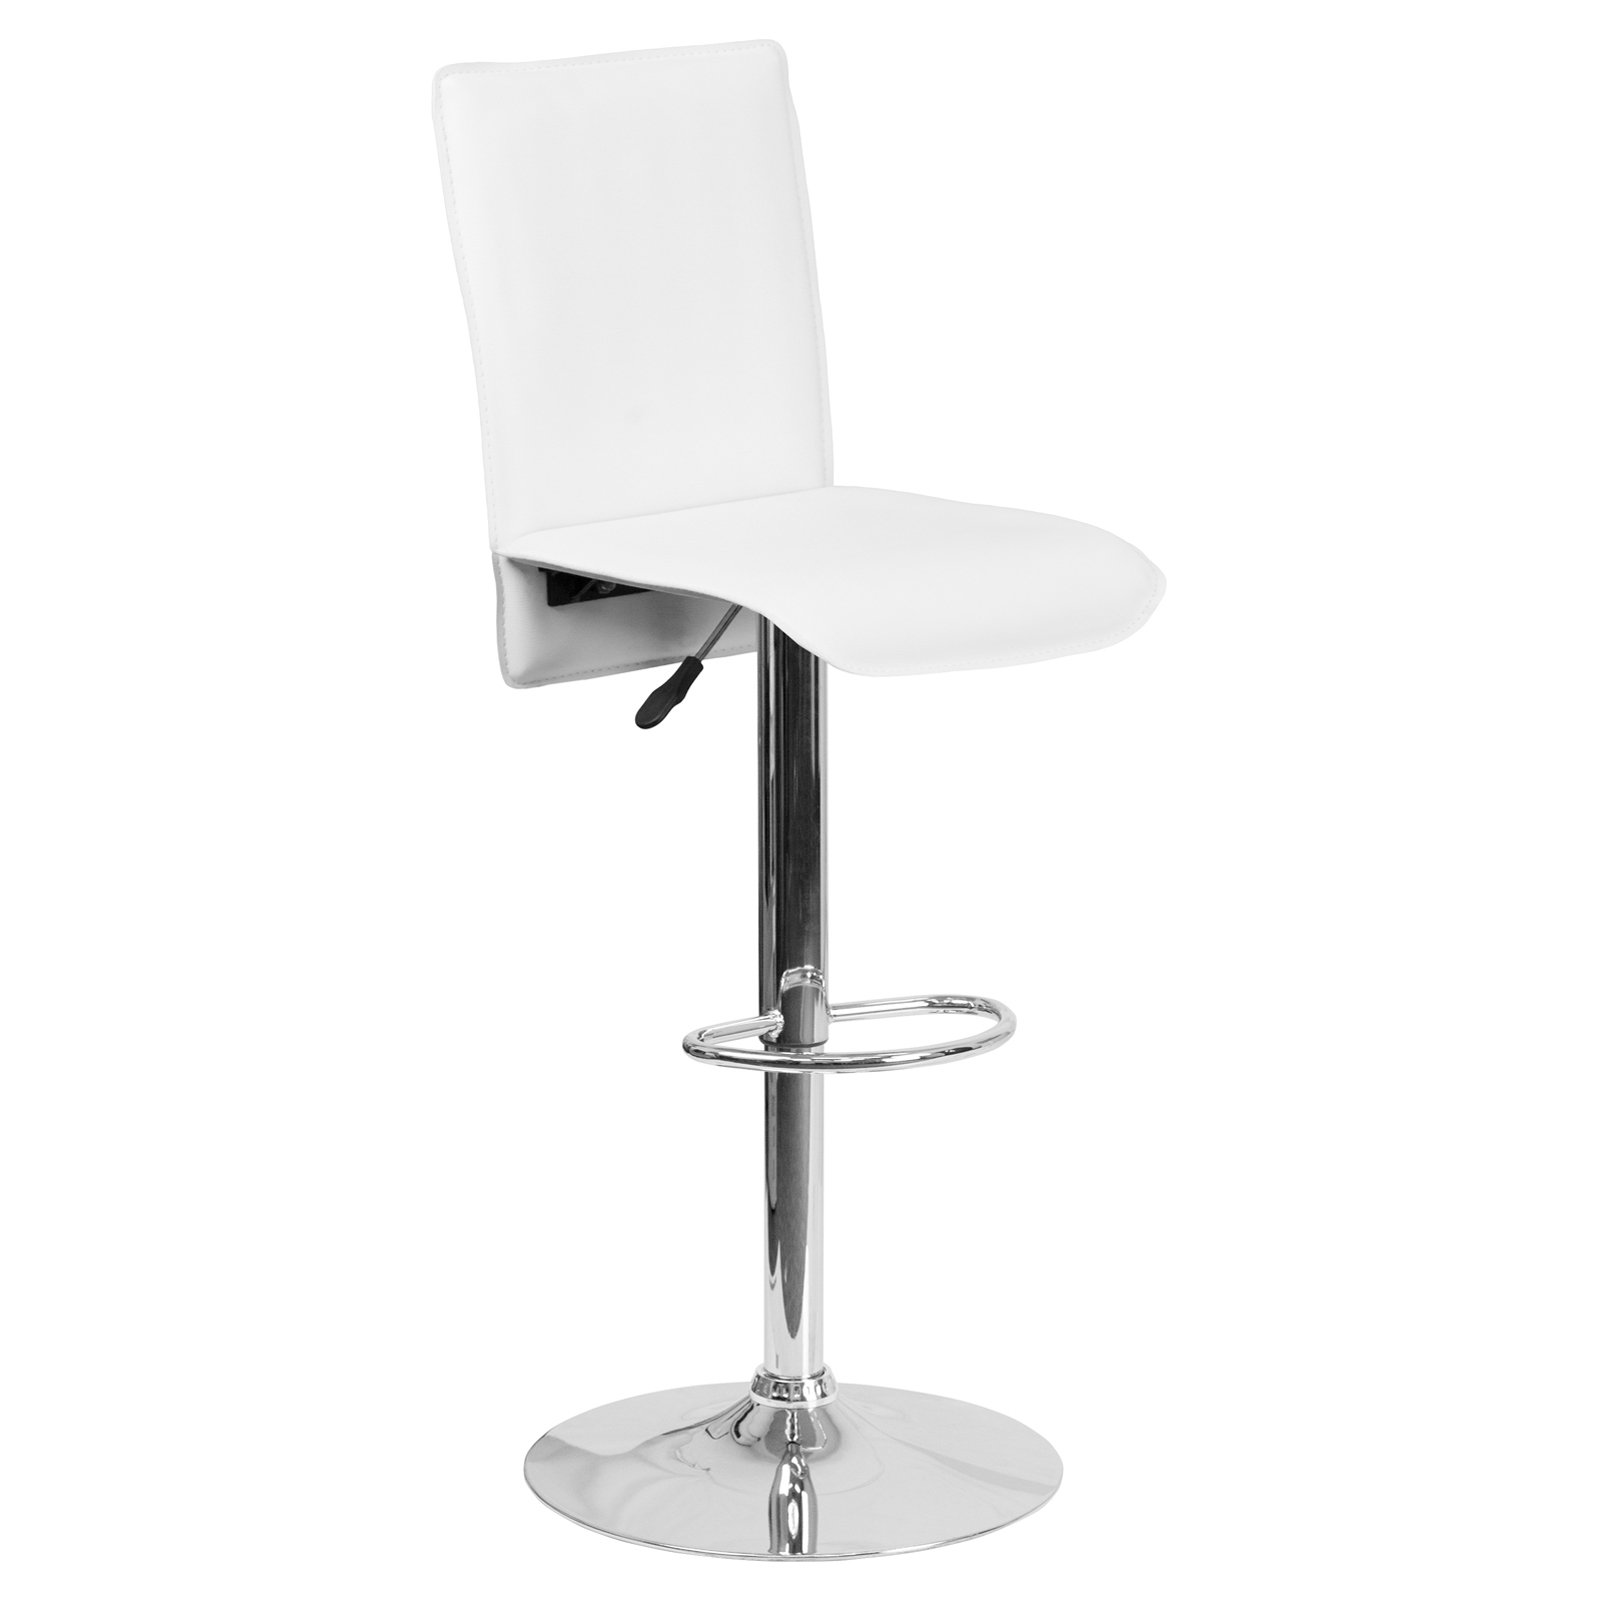 Flash Furniture Contemporary White Vinyl Adjustable Height Barstool with Extended Back and Chrome Base - image 1 of 2